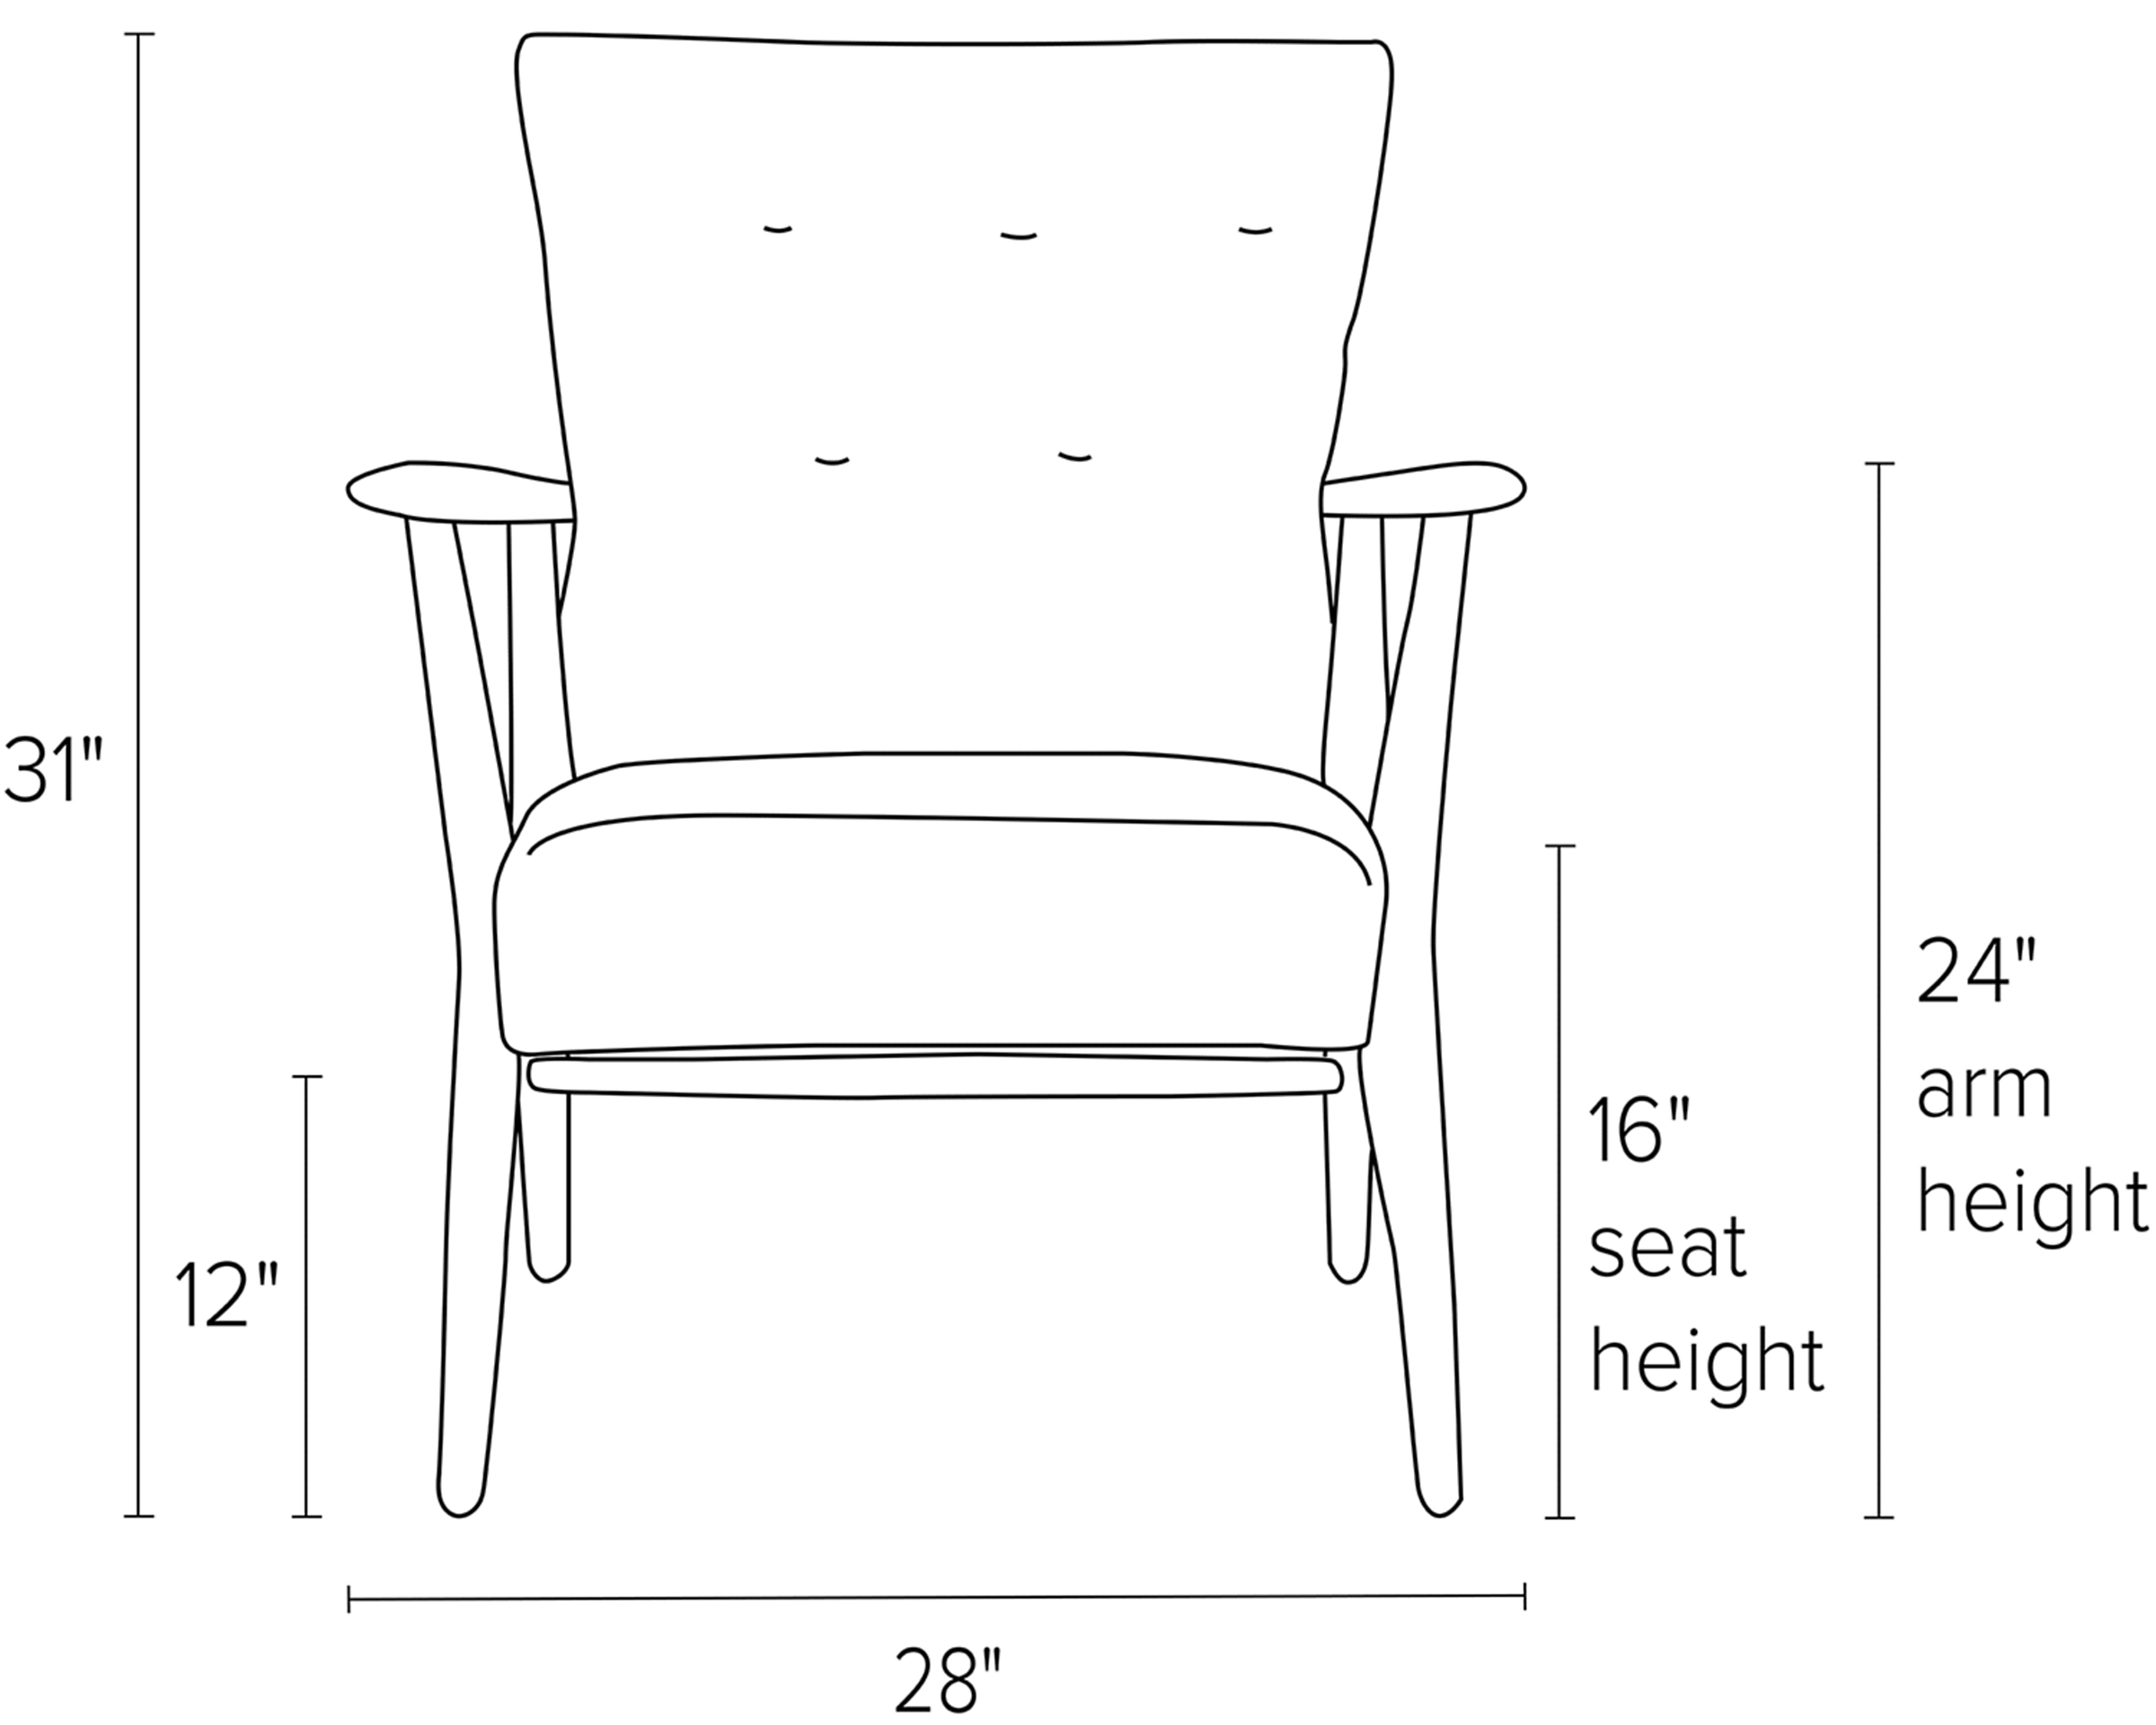 Front view dimension illustration of Jonas chair.